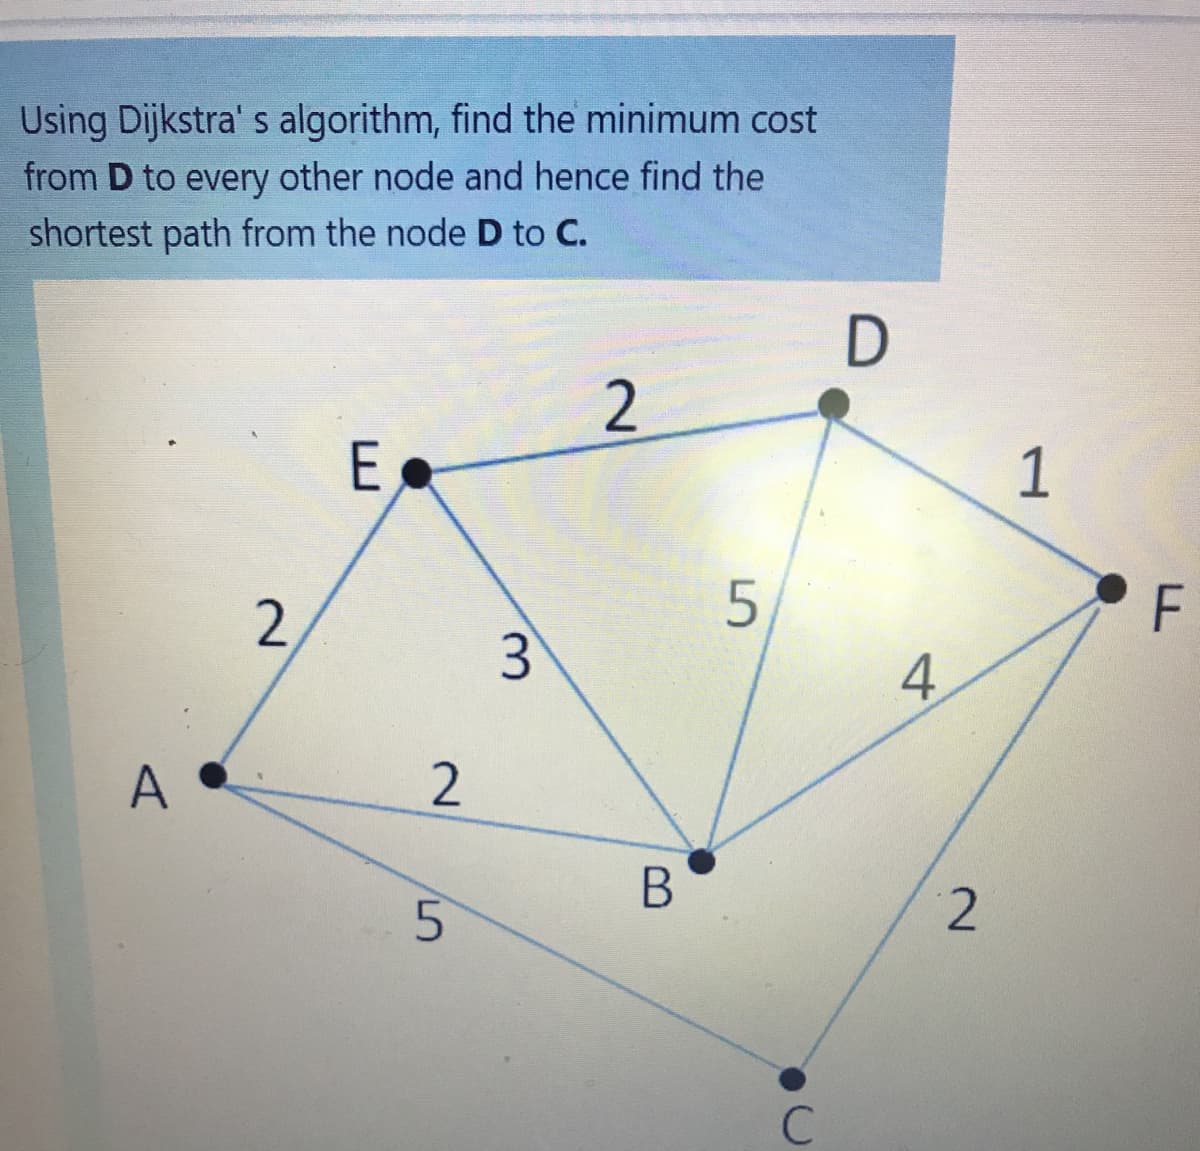 Using Dijkstra' s algorithm, find the minimum cost
from D to every other node and hence find the
shortest path from the node D to C.
2
E,
1
2
F
3)
4
A
5.
2.
2.
